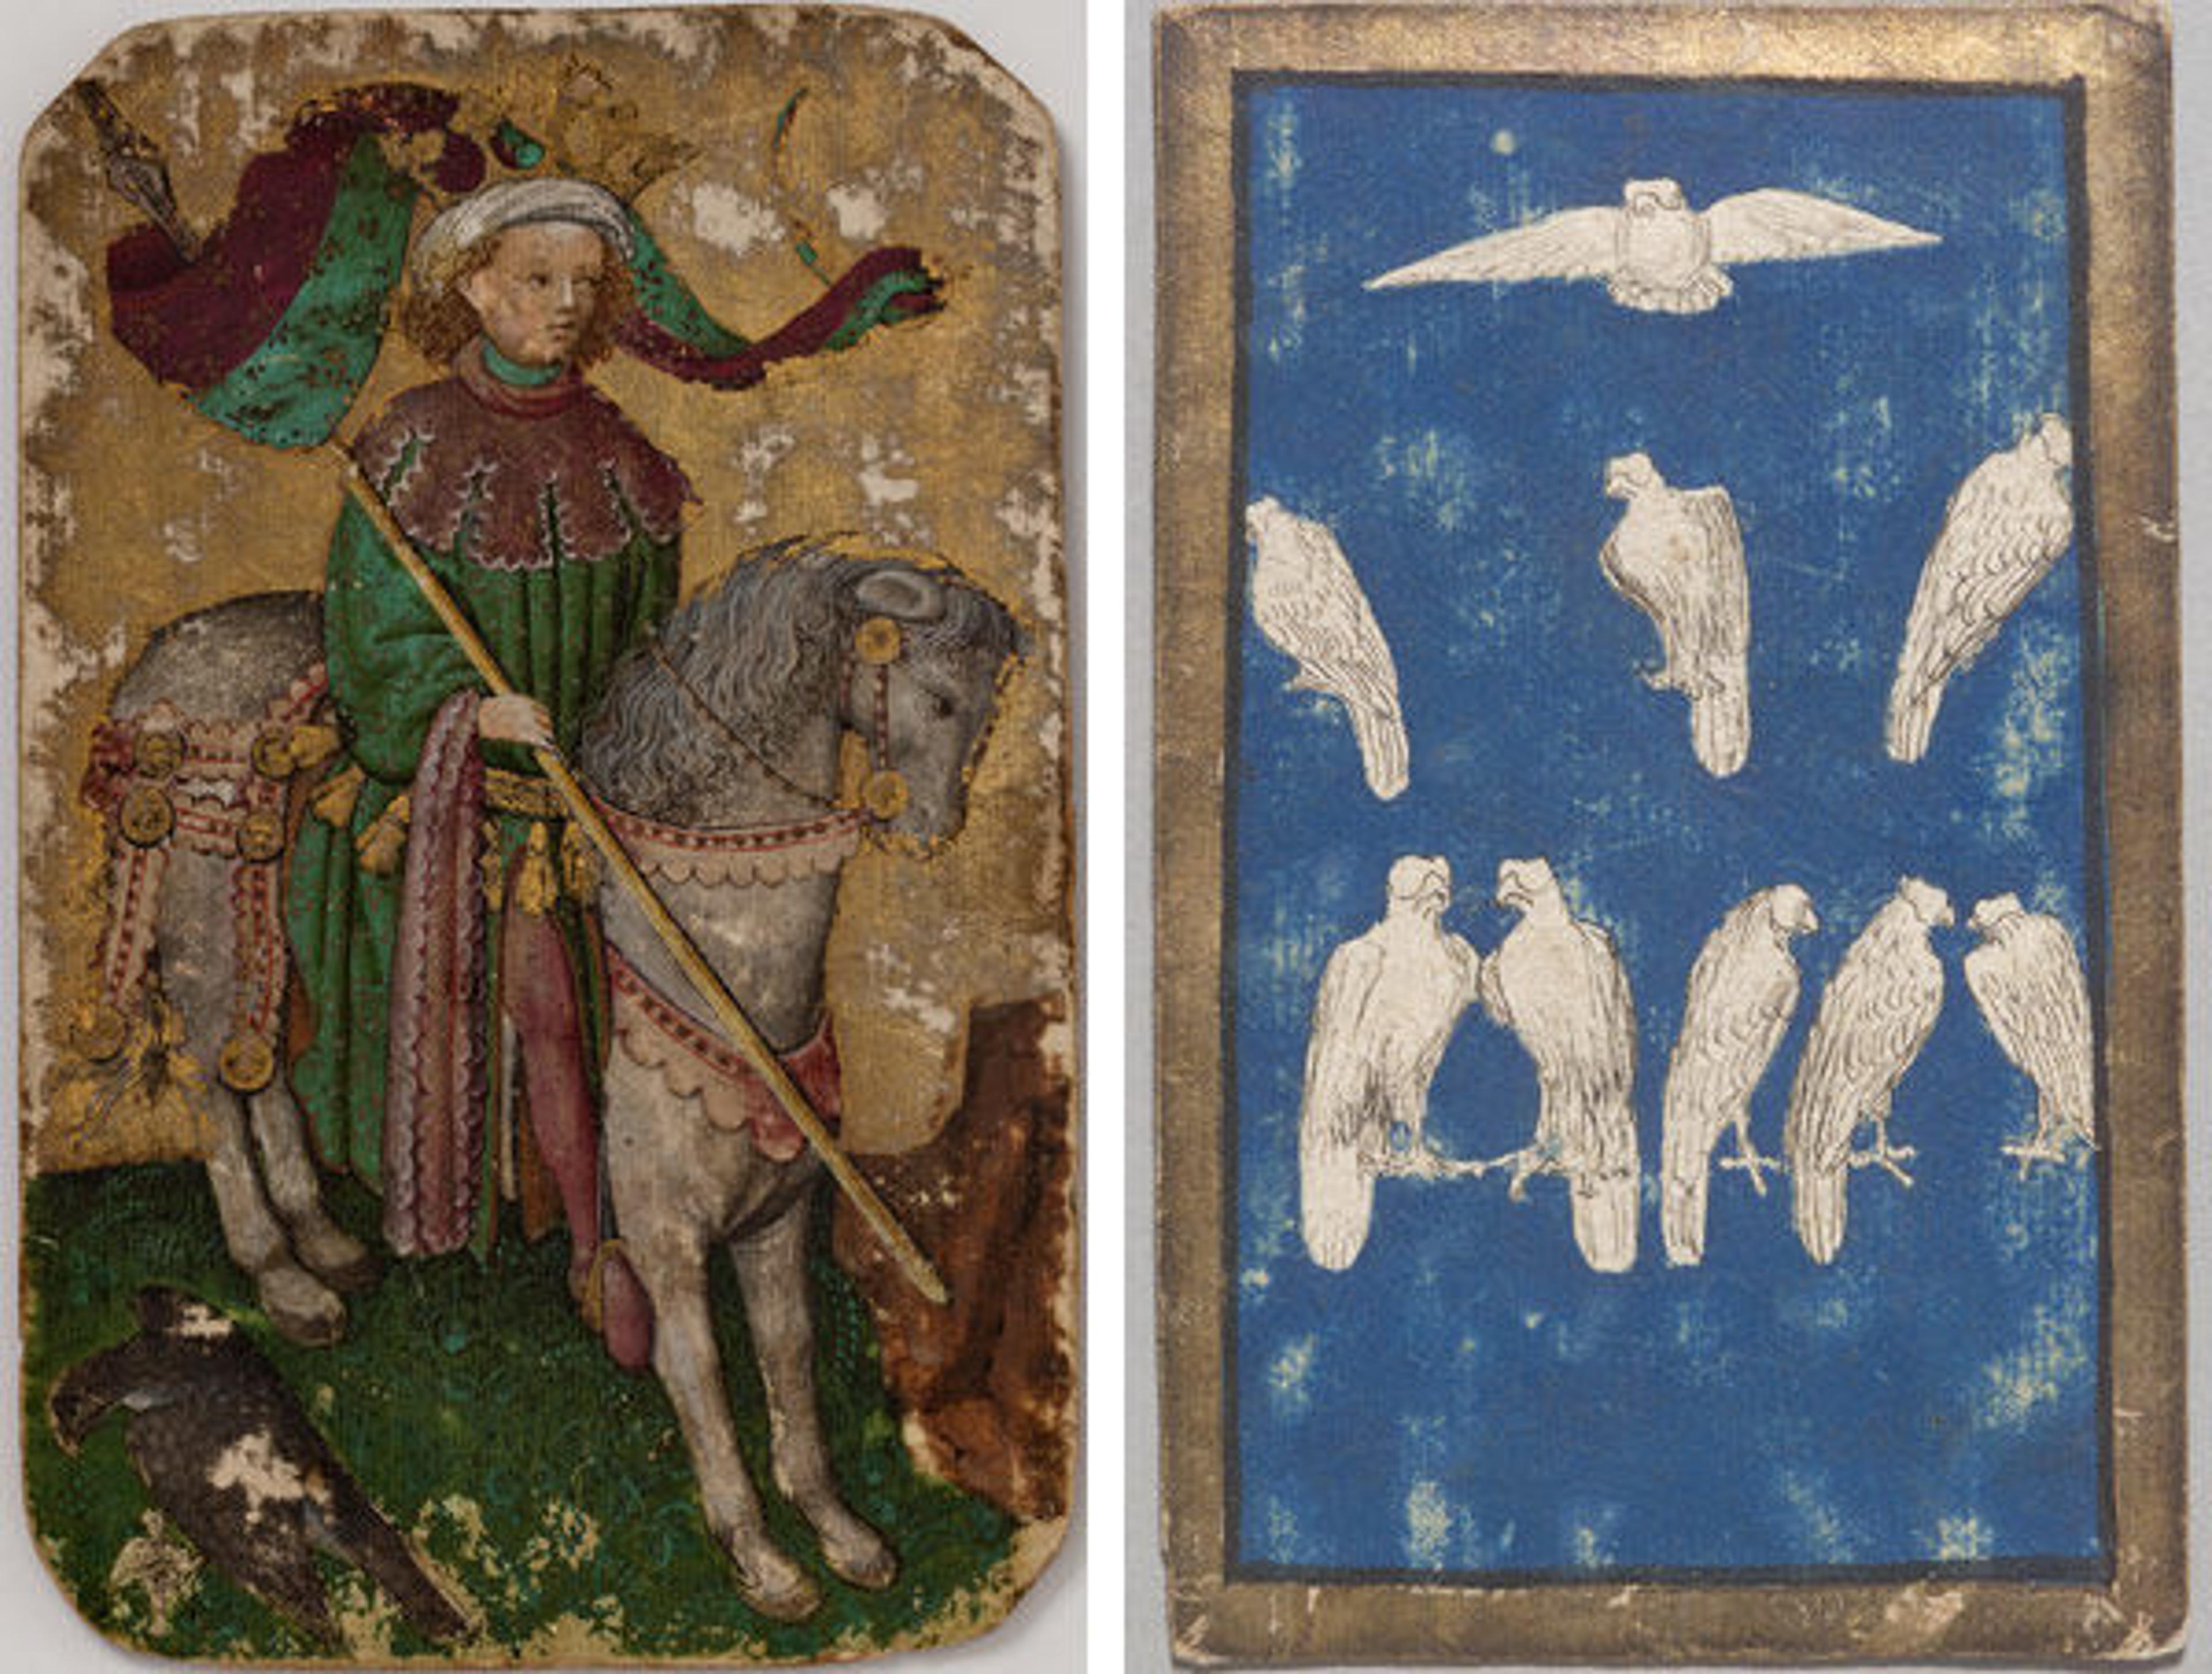 Left: The King of Falcons in The Stuttgart Playing Cards, ca. 1430. German, Upper Rhineland. Landesmuseum Württemberg, Stuttgart. Right: Workshop of Konrad Witz (active in Basel 1434–44). The 9 of Falcons in The Courtly Hunt Cards, ca. 1440–45. German, Upper Rhineland. Kunsthistorisches Museum Wien